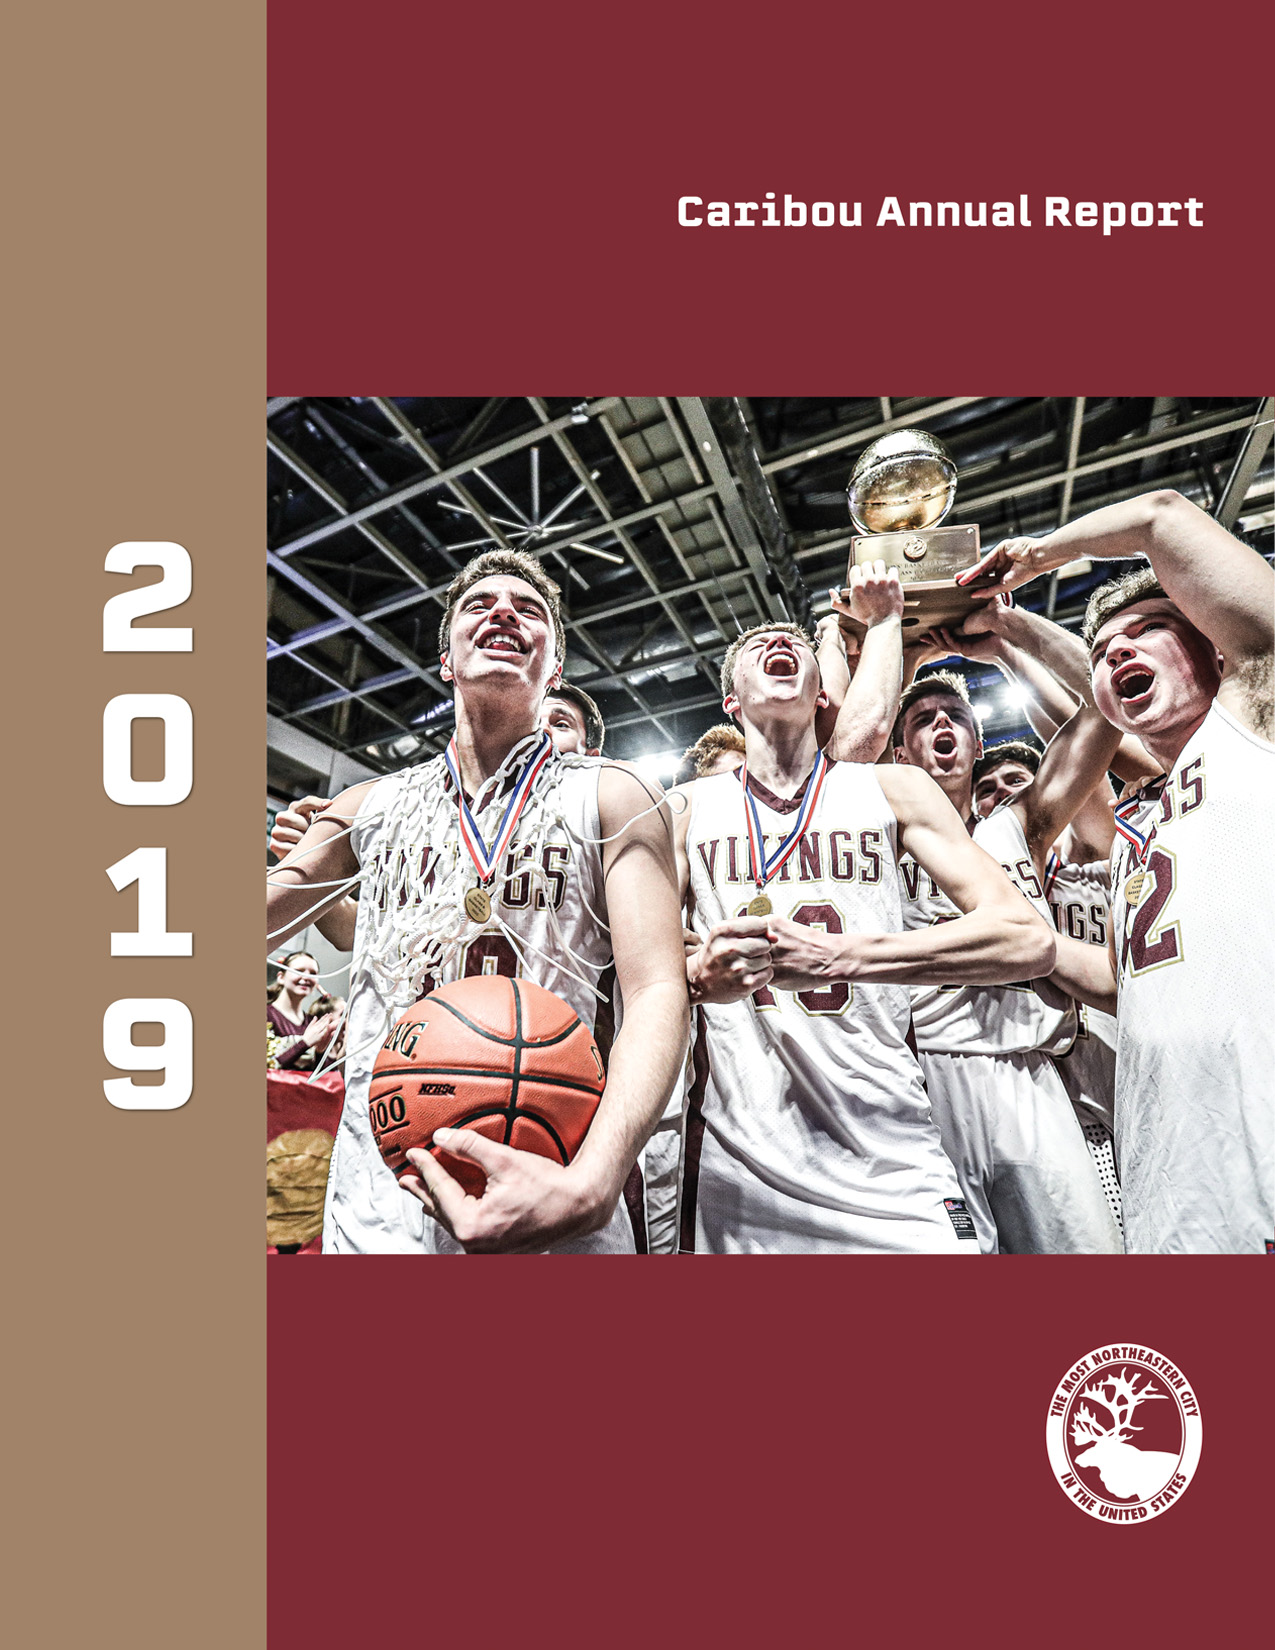 2019 Caribou Annual Report (front cover).jpg